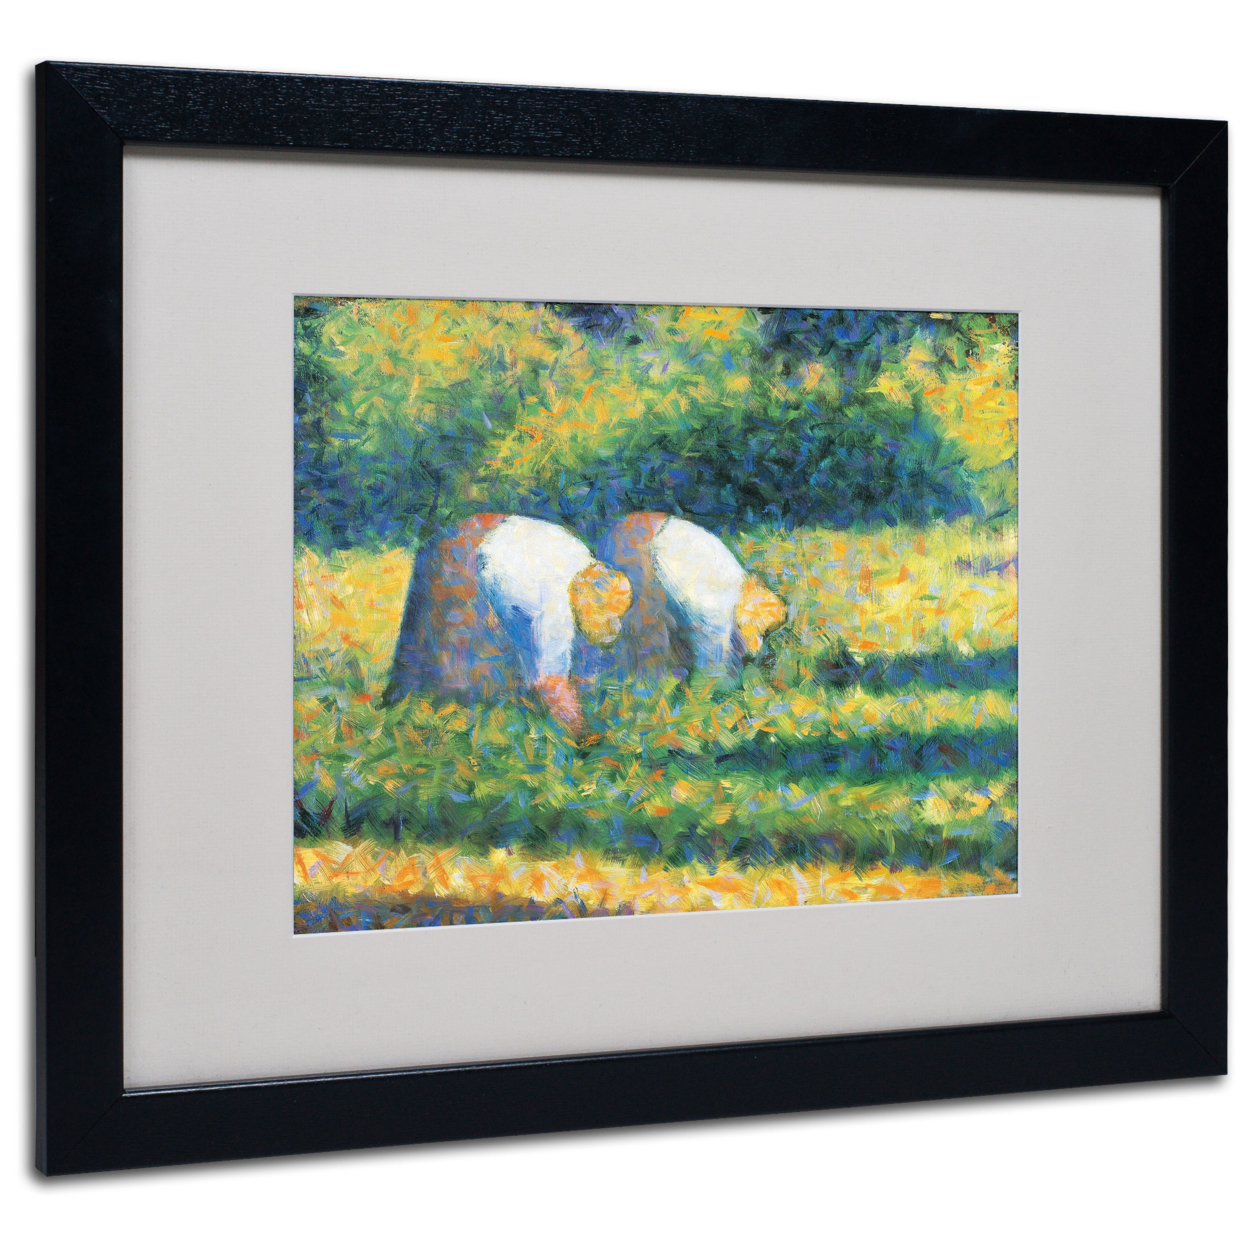 Georges Seurat 'Farmers At Work 1882' Black Wooden Framed Art 18 X 22 Inches